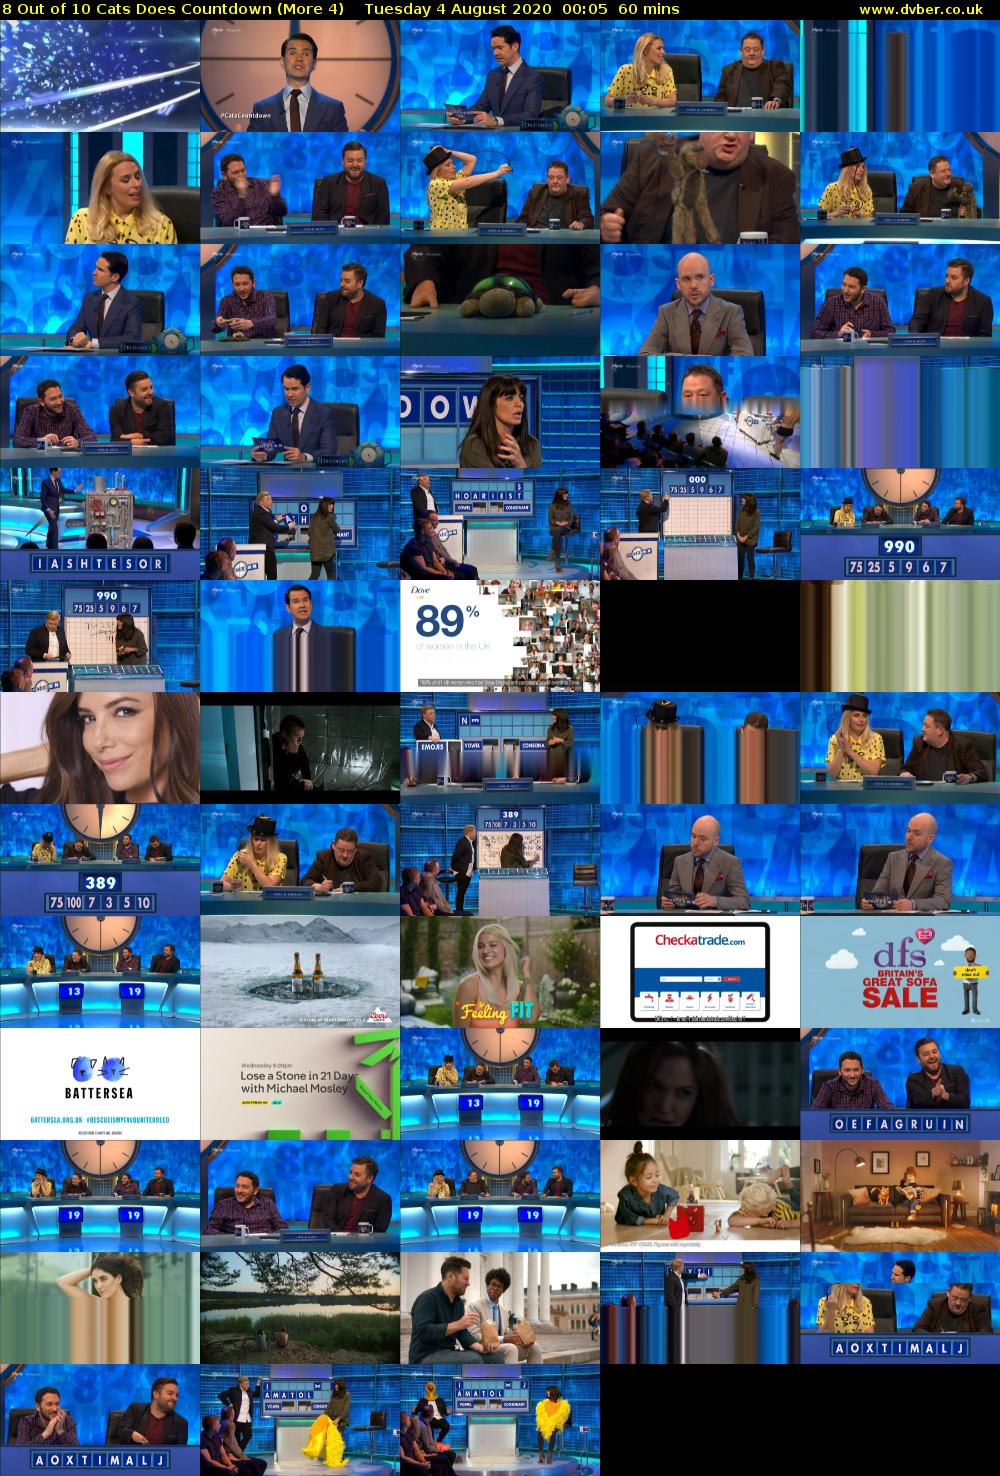 8 Out of 10 Cats Does Countdown (More 4) Tuesday 4 August 2020 00:05 - 01:05